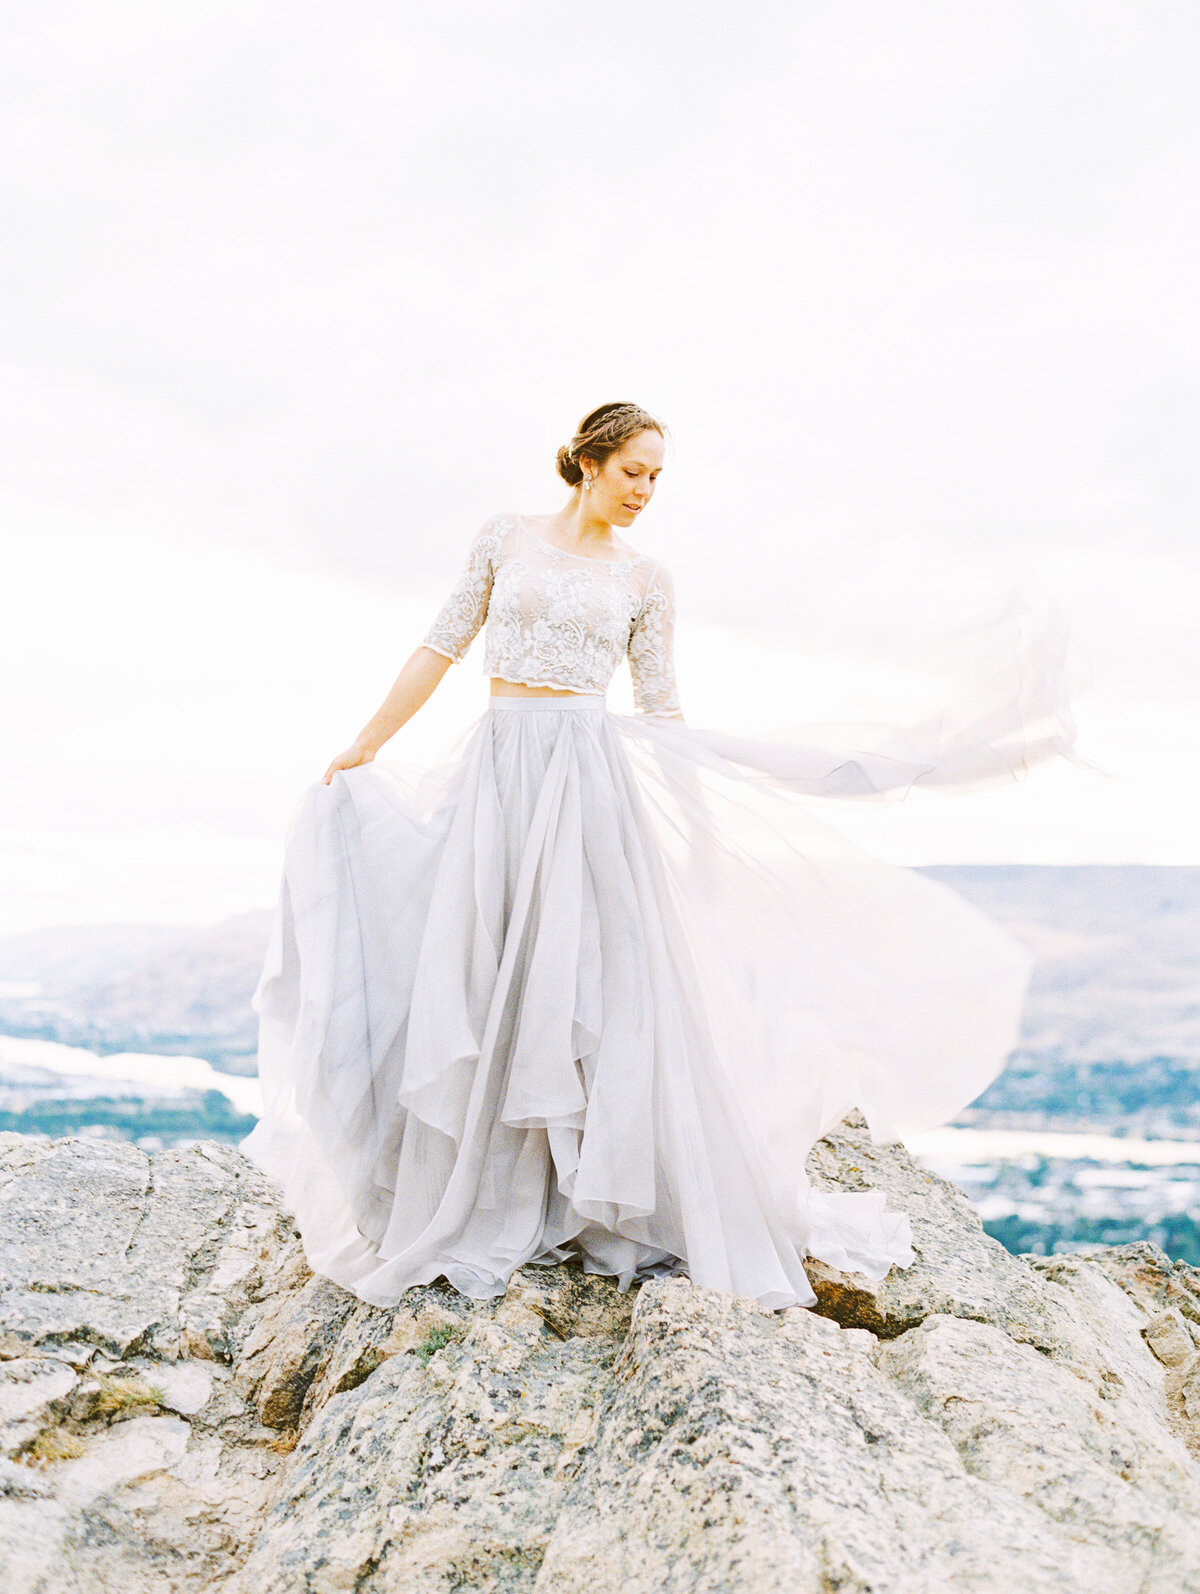 Sunrise Elopement Photos in Leanne Marshall-20